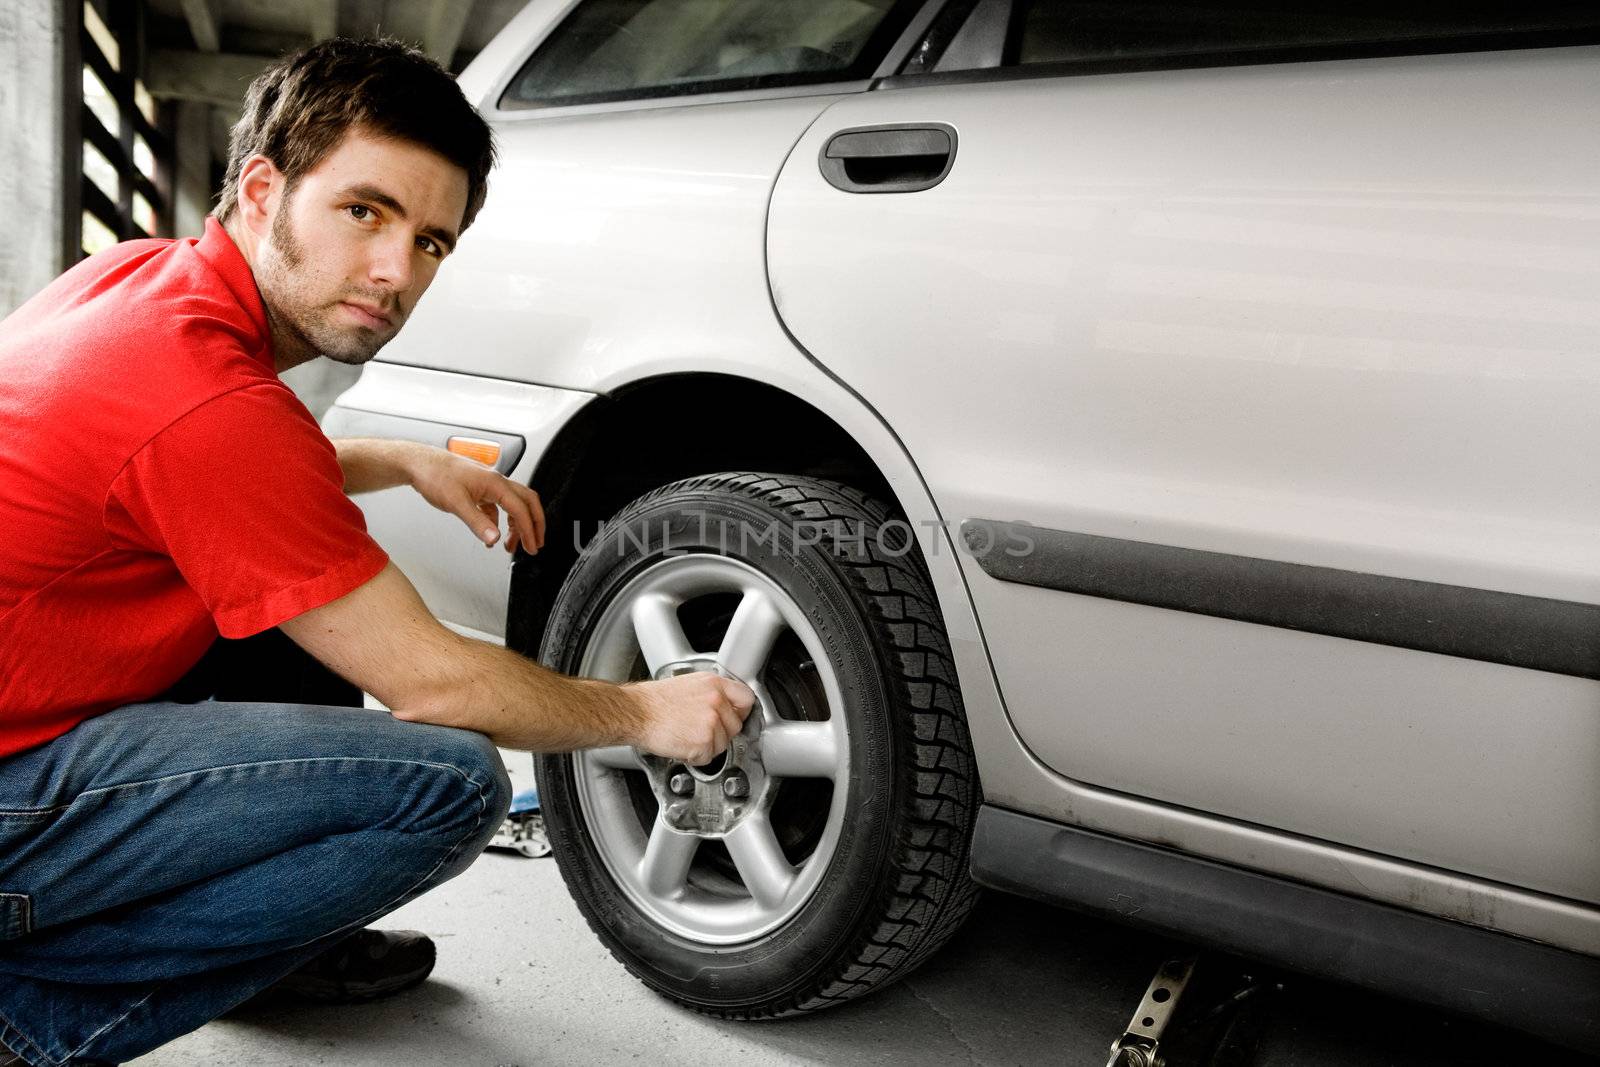 Taking off the bolts on a car tire